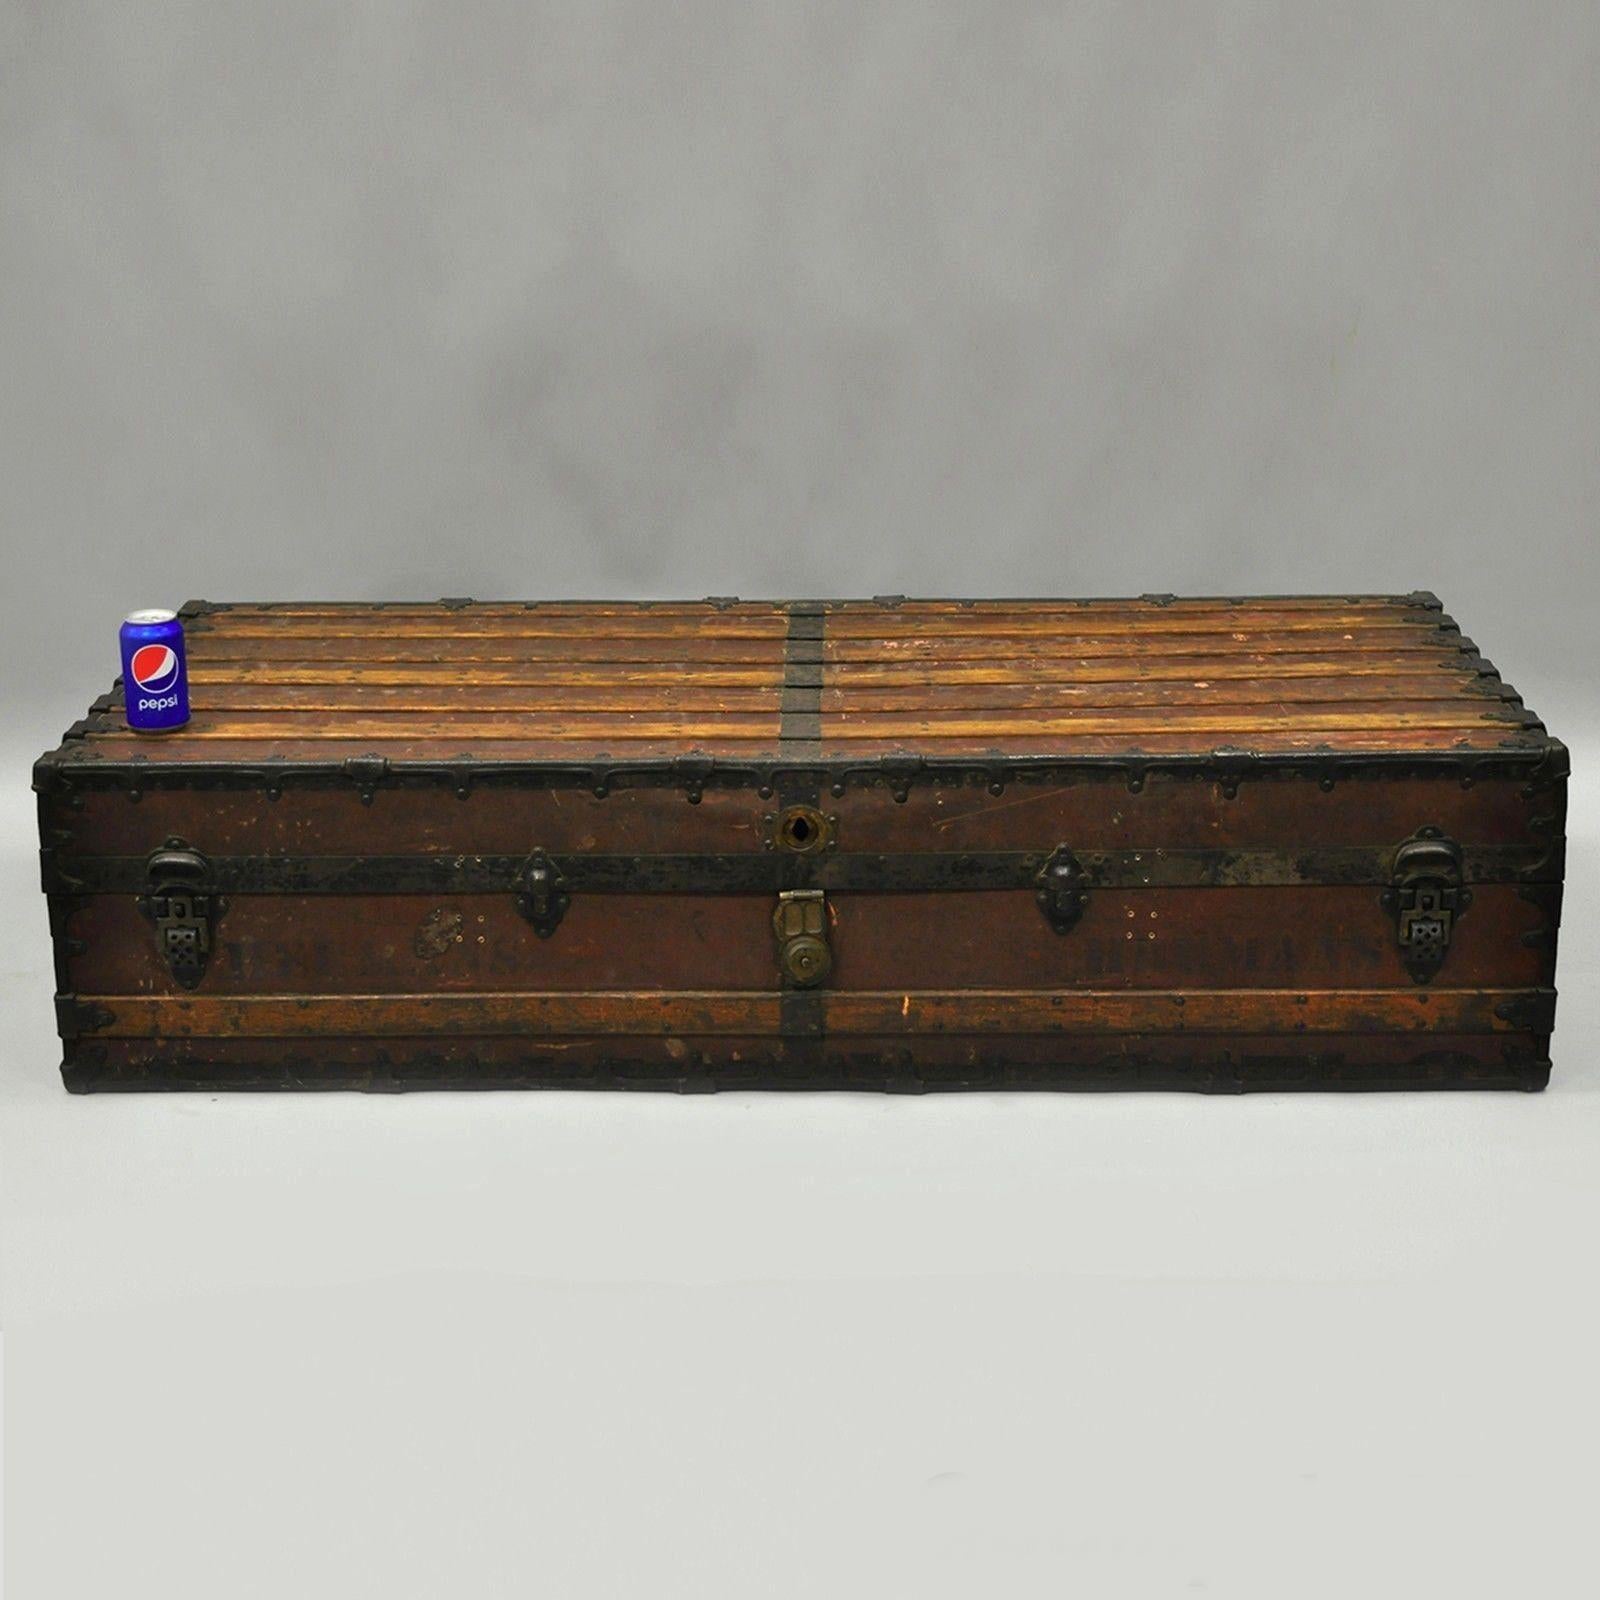 Item: Huge Antique William Bal extralarge trunk. Front of trunk looks to read 